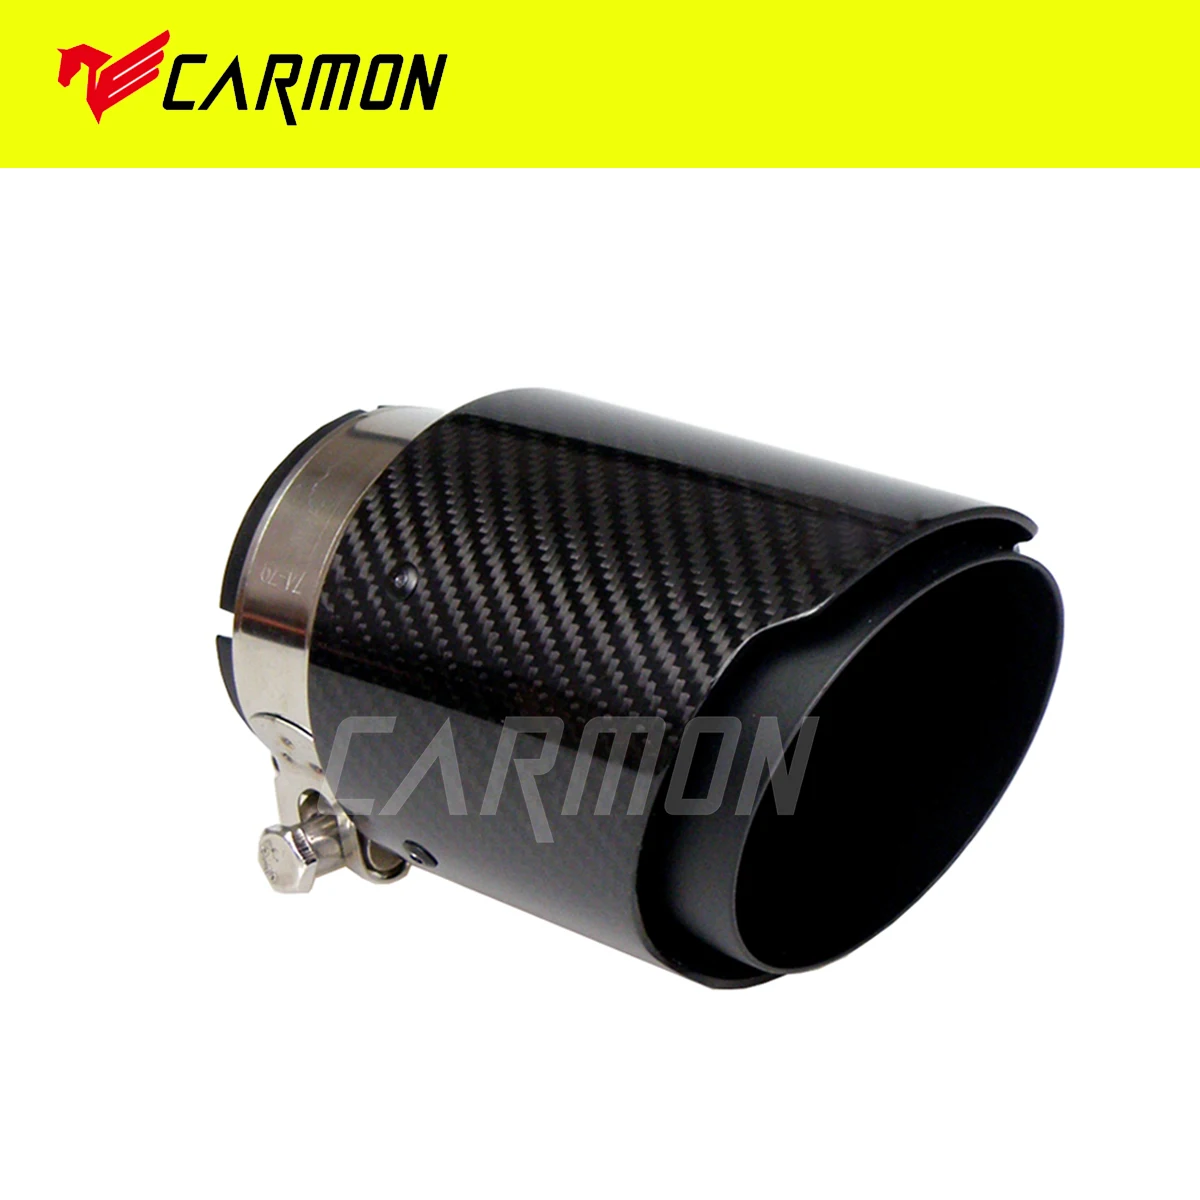 

Glossy Twill Carbon Fibre Car Exhaust Tip Black Coated Stainless Steel Muffler Tip Tail Pipe For BMW BENZ AUDI Car Accessories